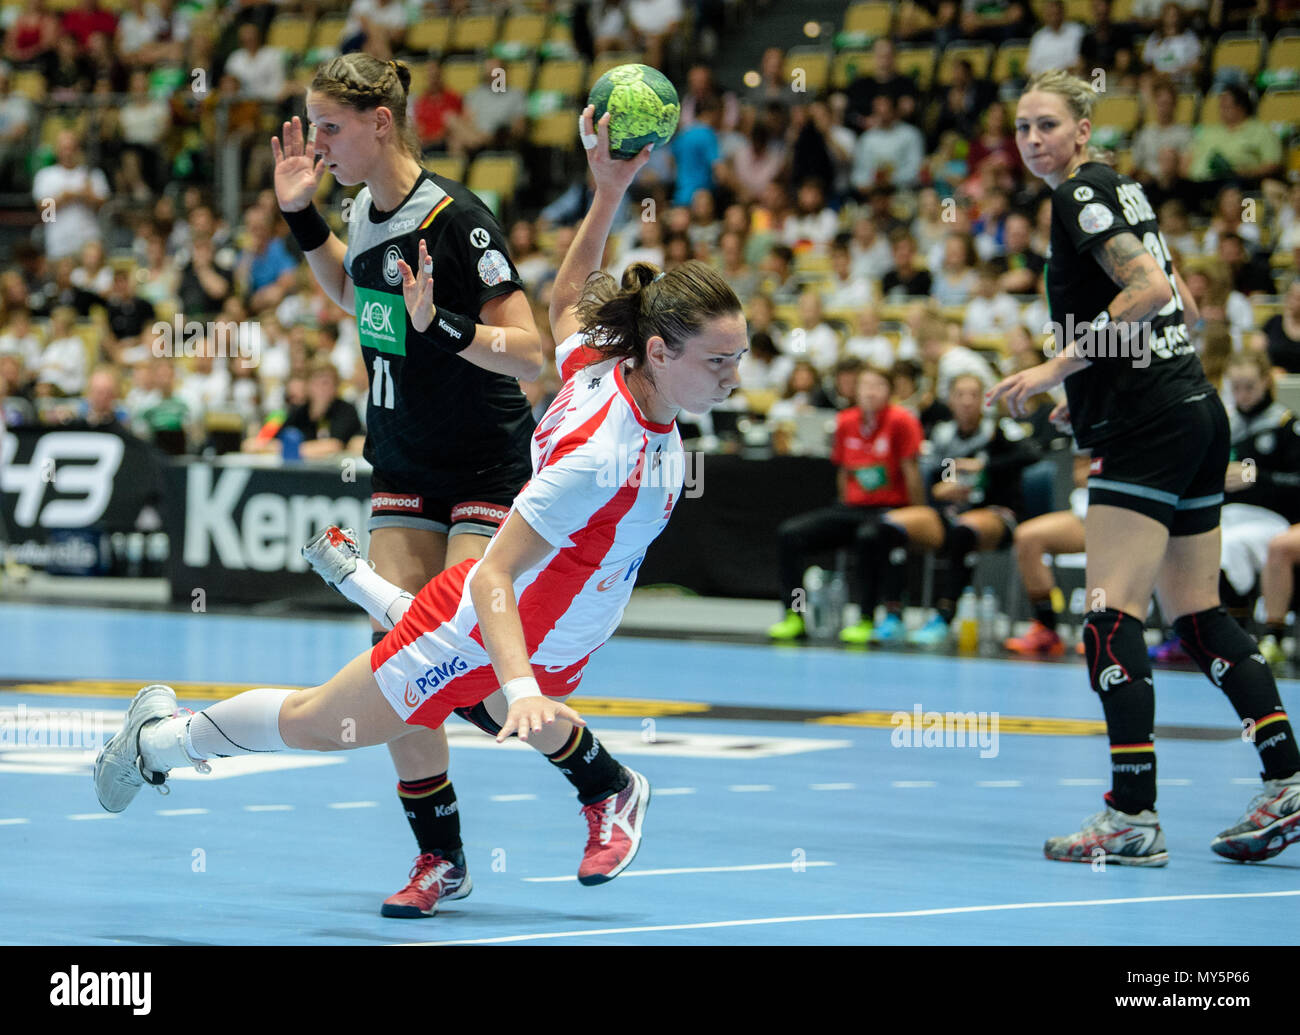 06 June 2018, Germany, Munich: Handball, women, international match, Germany vs Poland in the Olympic Hall. Poland's Monika Kobylinska (C) throwing the ball at goal. Germany's Xenia Smits is on the left and Luisa Schulze on the right. Photo: Matthias Balk/dpa Stock Photo